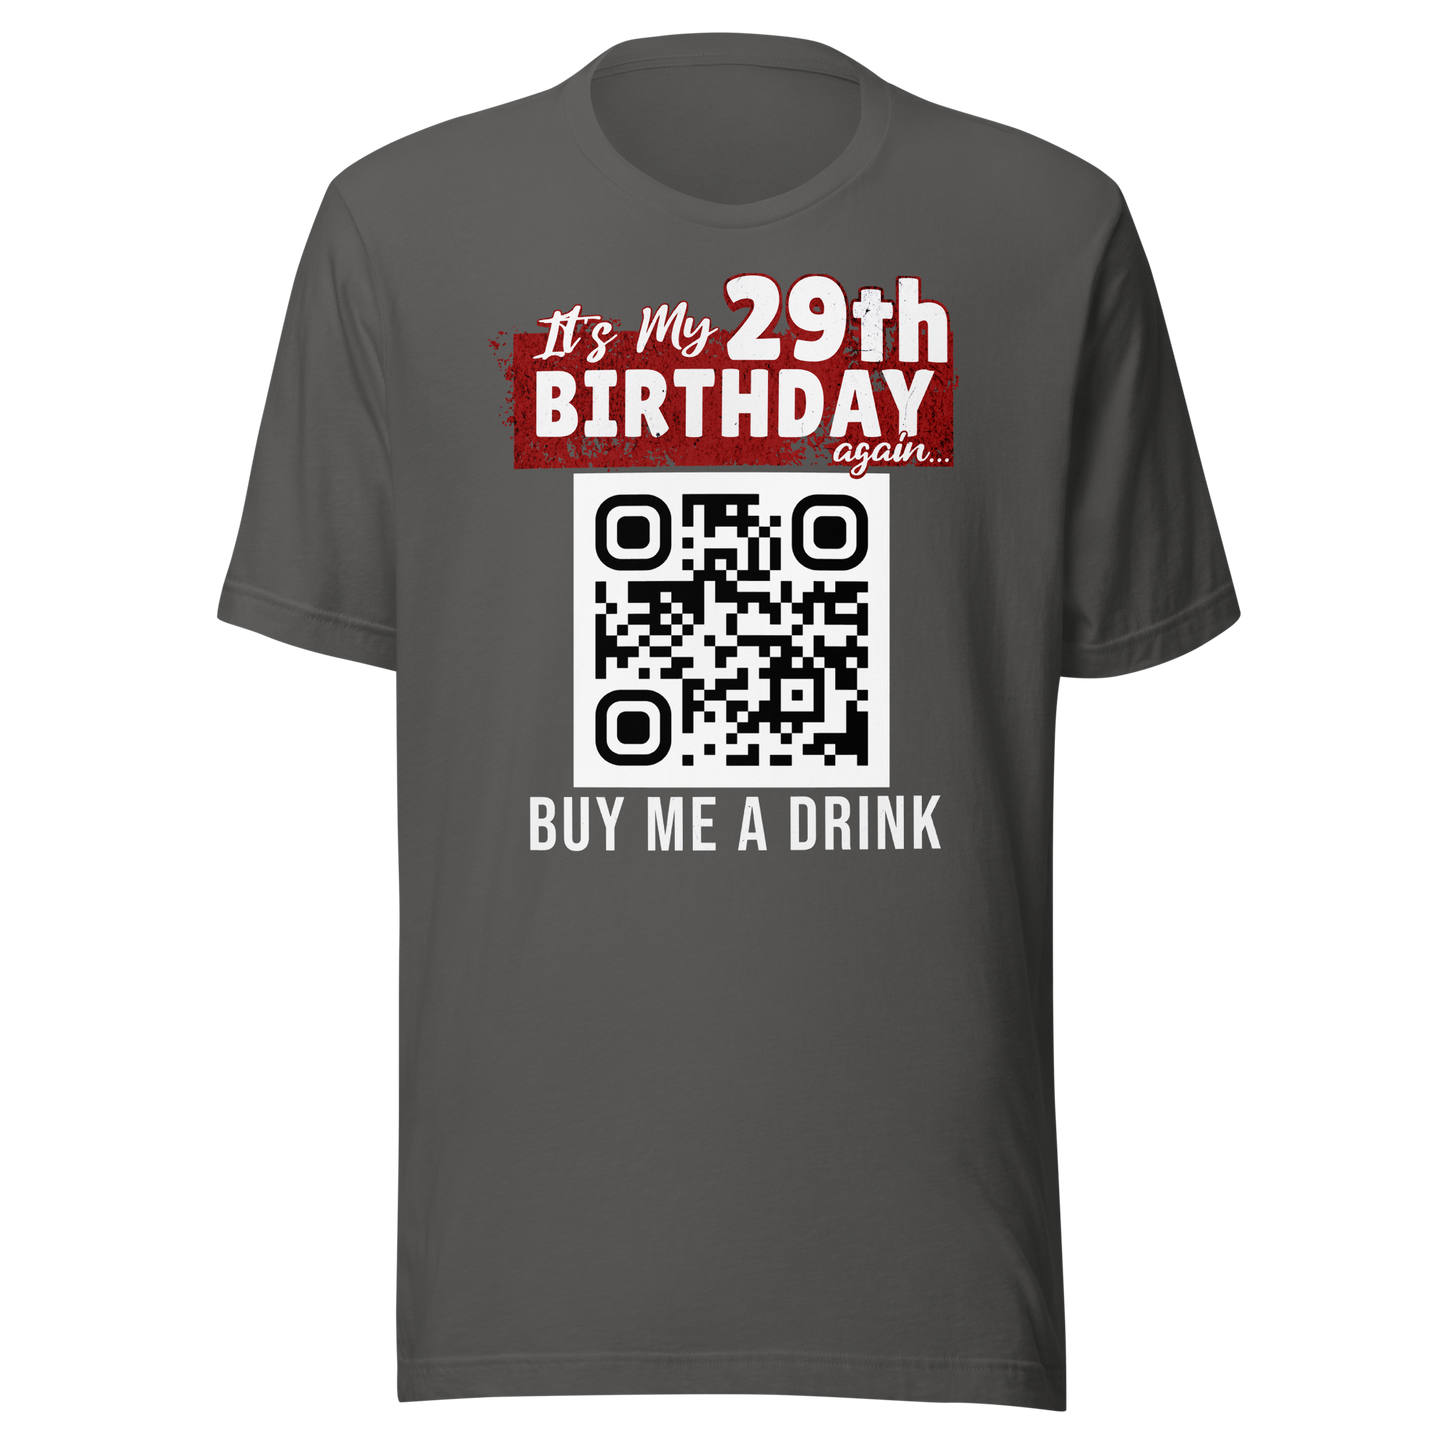 It's My 29th Birthday (Again) Buy Me A Drink T-shirt - Personalizable